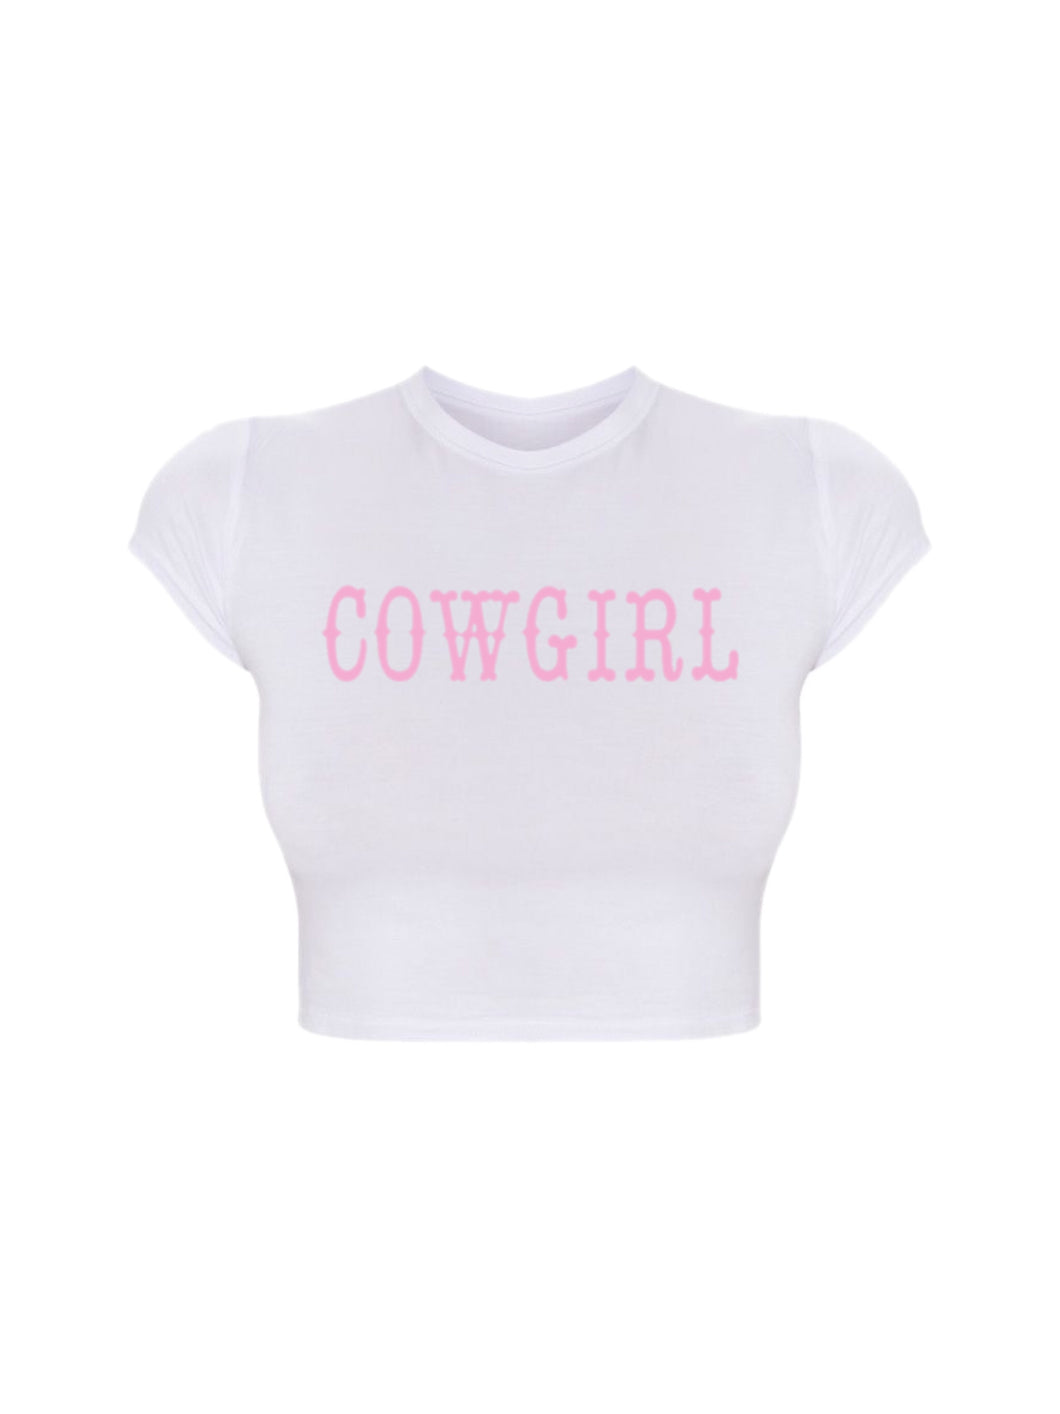 COWGIRL BABY TEE- WHITE